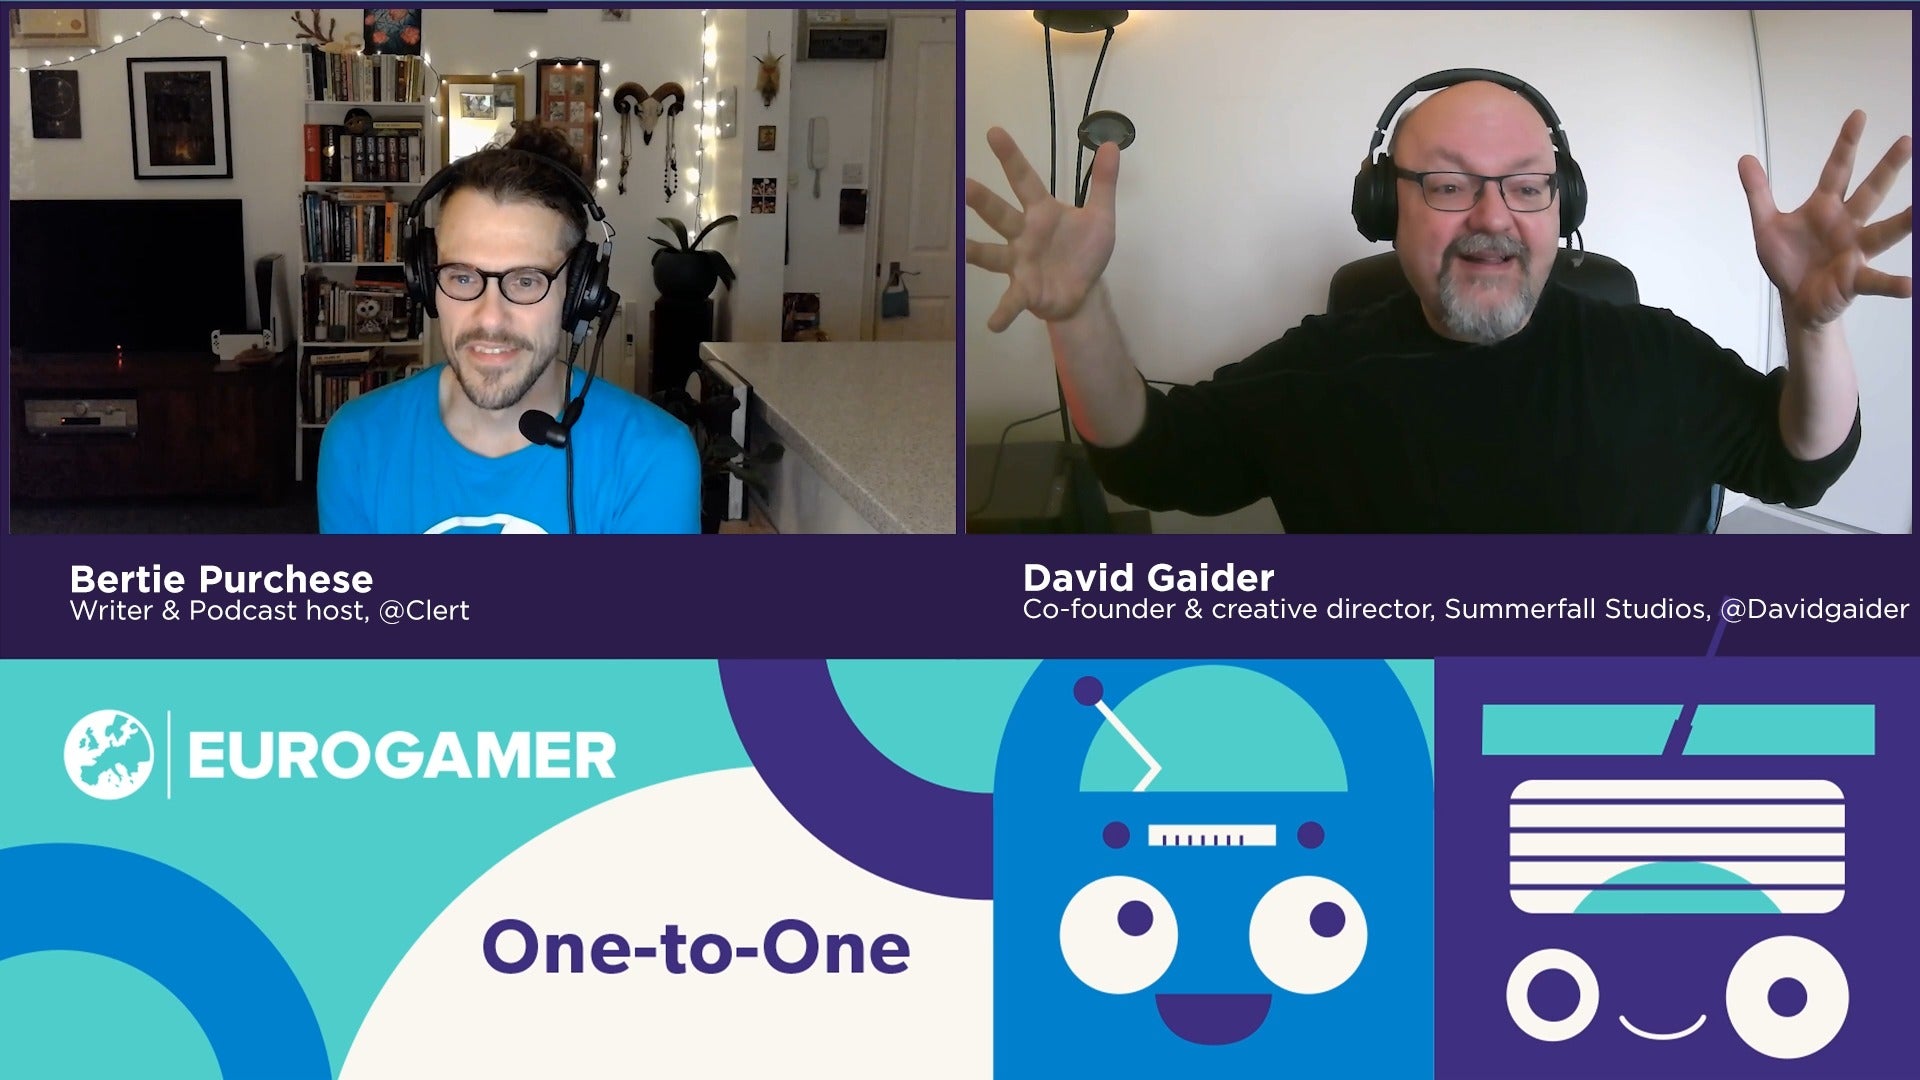 Dragon Age creator David Gaider spreads his hands wide as he explains something to a smiling Bertie in this episode of the One-to-one podcast.